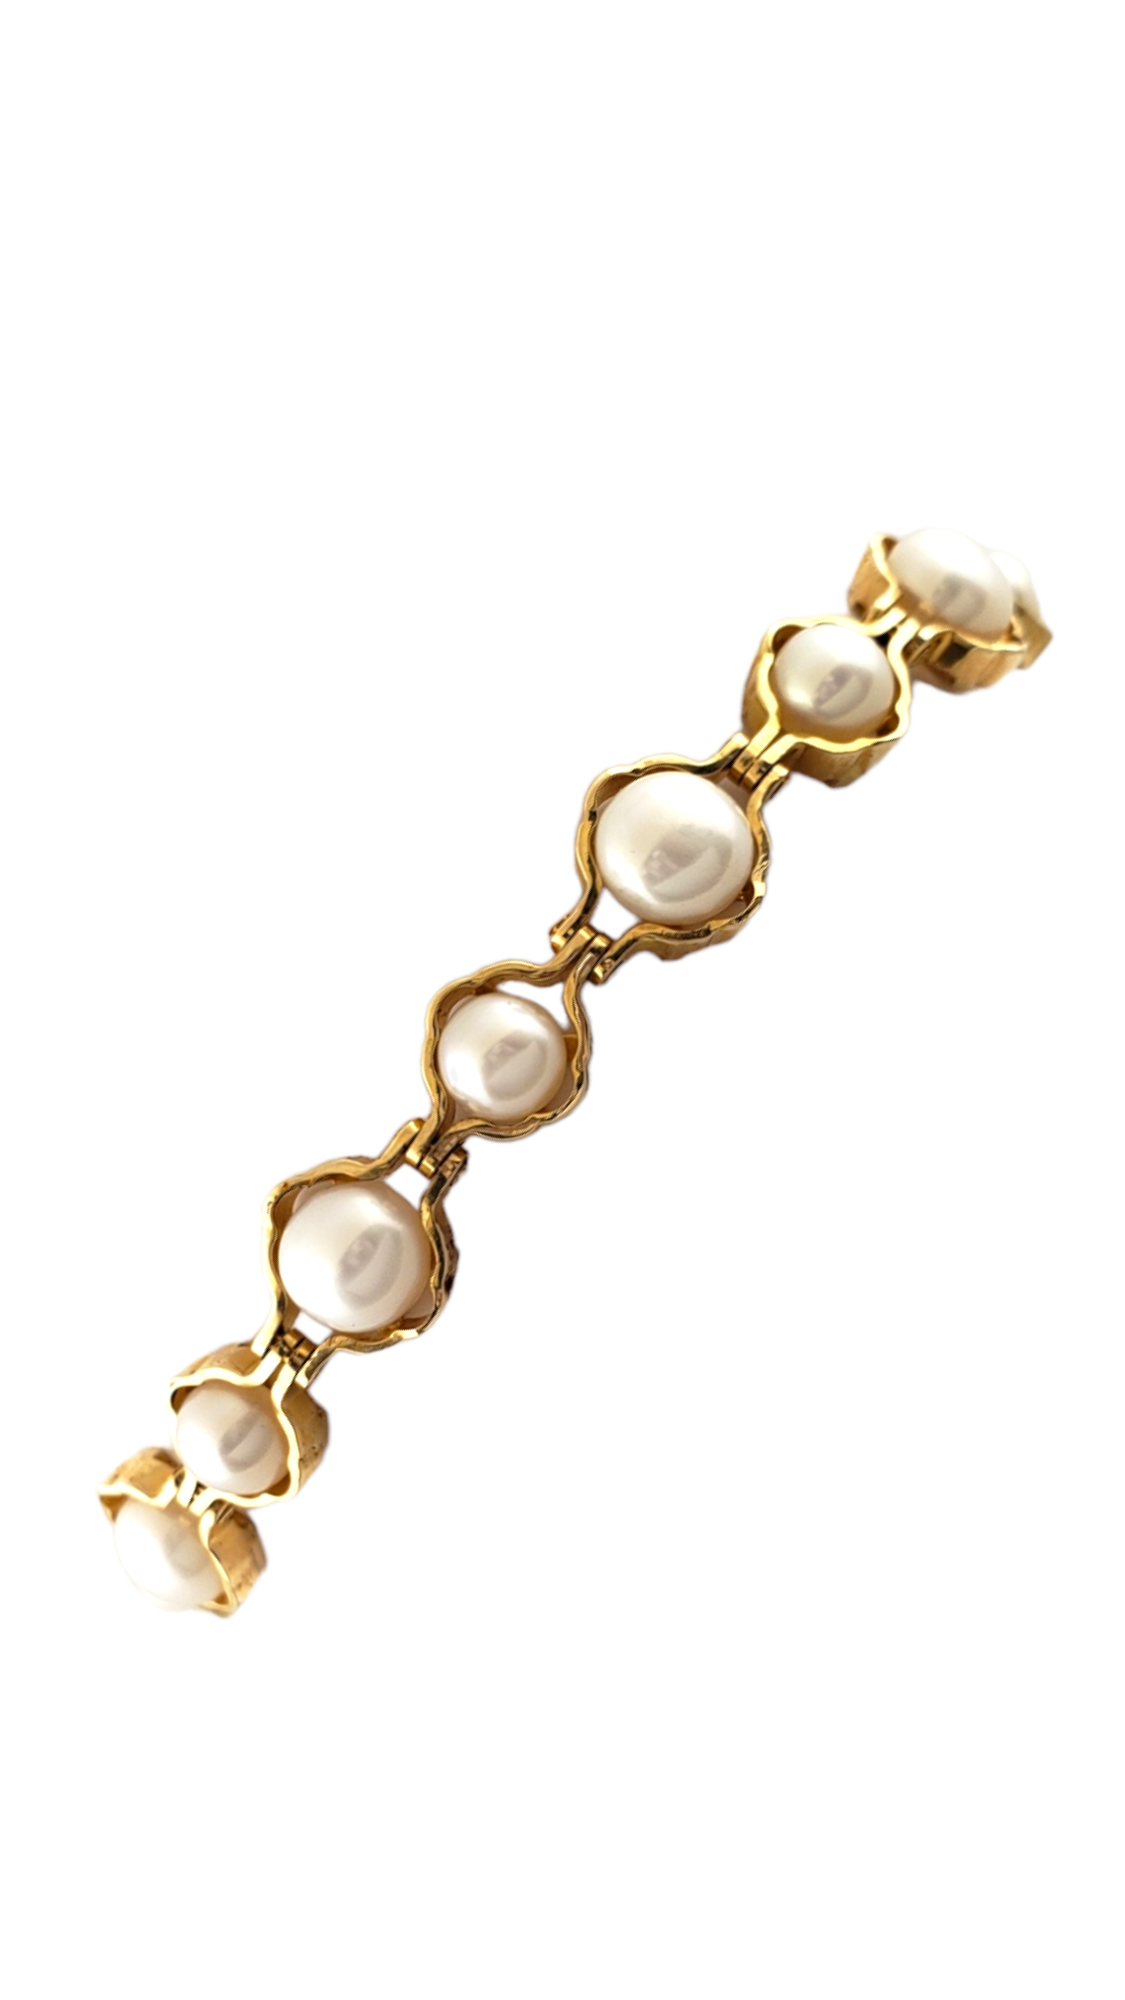 14k Yellow Gold Woman's Gold, Pearl Bracelet new w/o tags